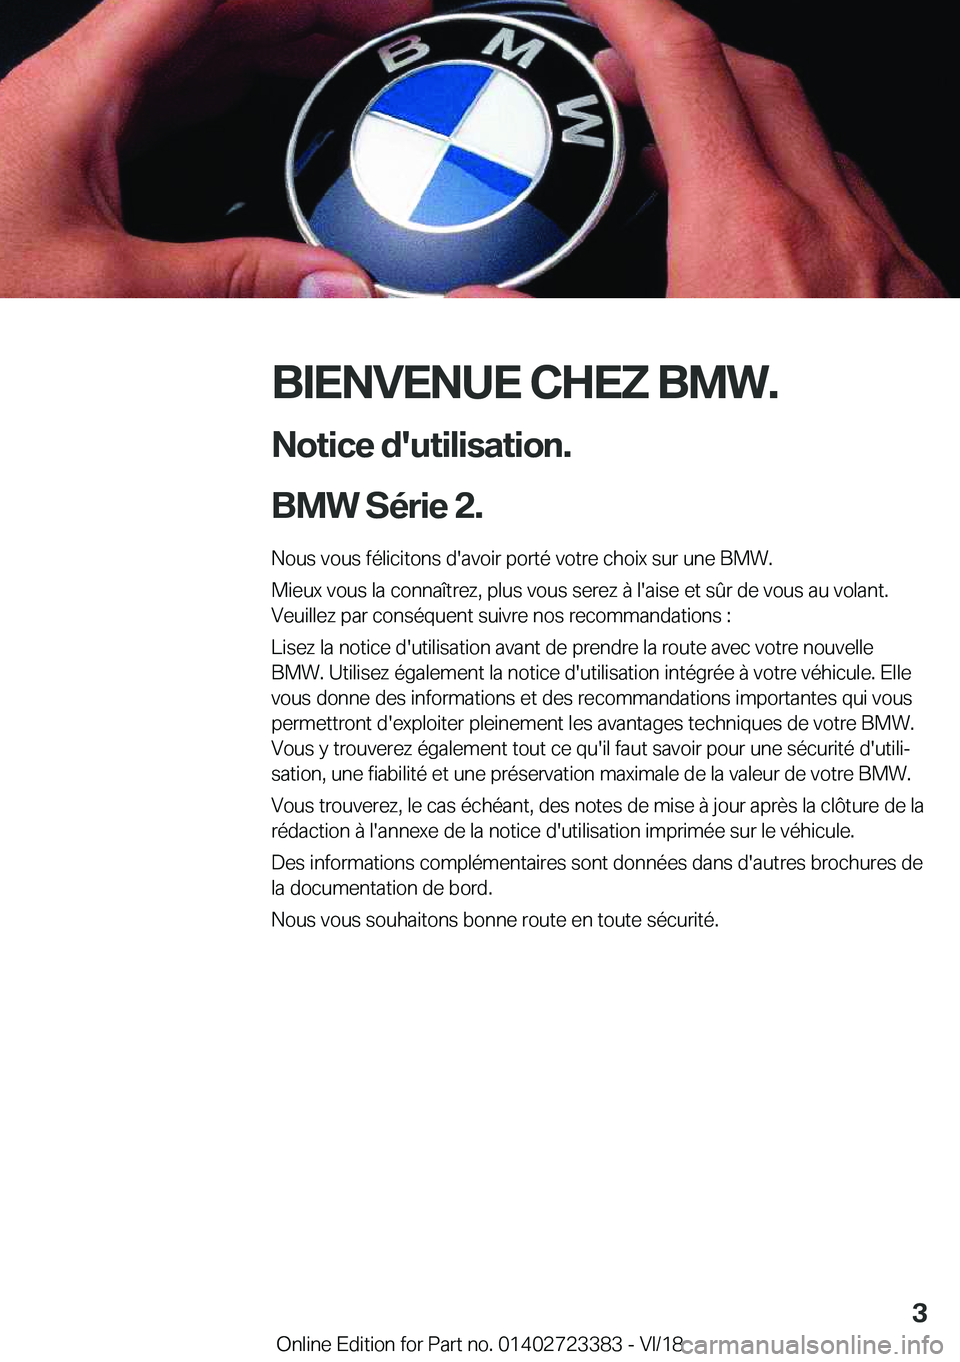 BMW 2 SERIES COUPE 2019  Notices Demploi (in French) �B�I�E�N�V�E�N�U�E��C�H�E�;��B�M�W�.�N�o�t�i�c�e��d�'�u�t�i�l�i�s�a�t�i�o�n�.
�B�M�W��S�é�r�i�e��2�.�
�N�o�u�s��v�o�u�s��f�é�l�i�c�i�t�o�n�s��d�'�a�v�o�i�r��p�o�r�t�é��v�o�t�r�e�